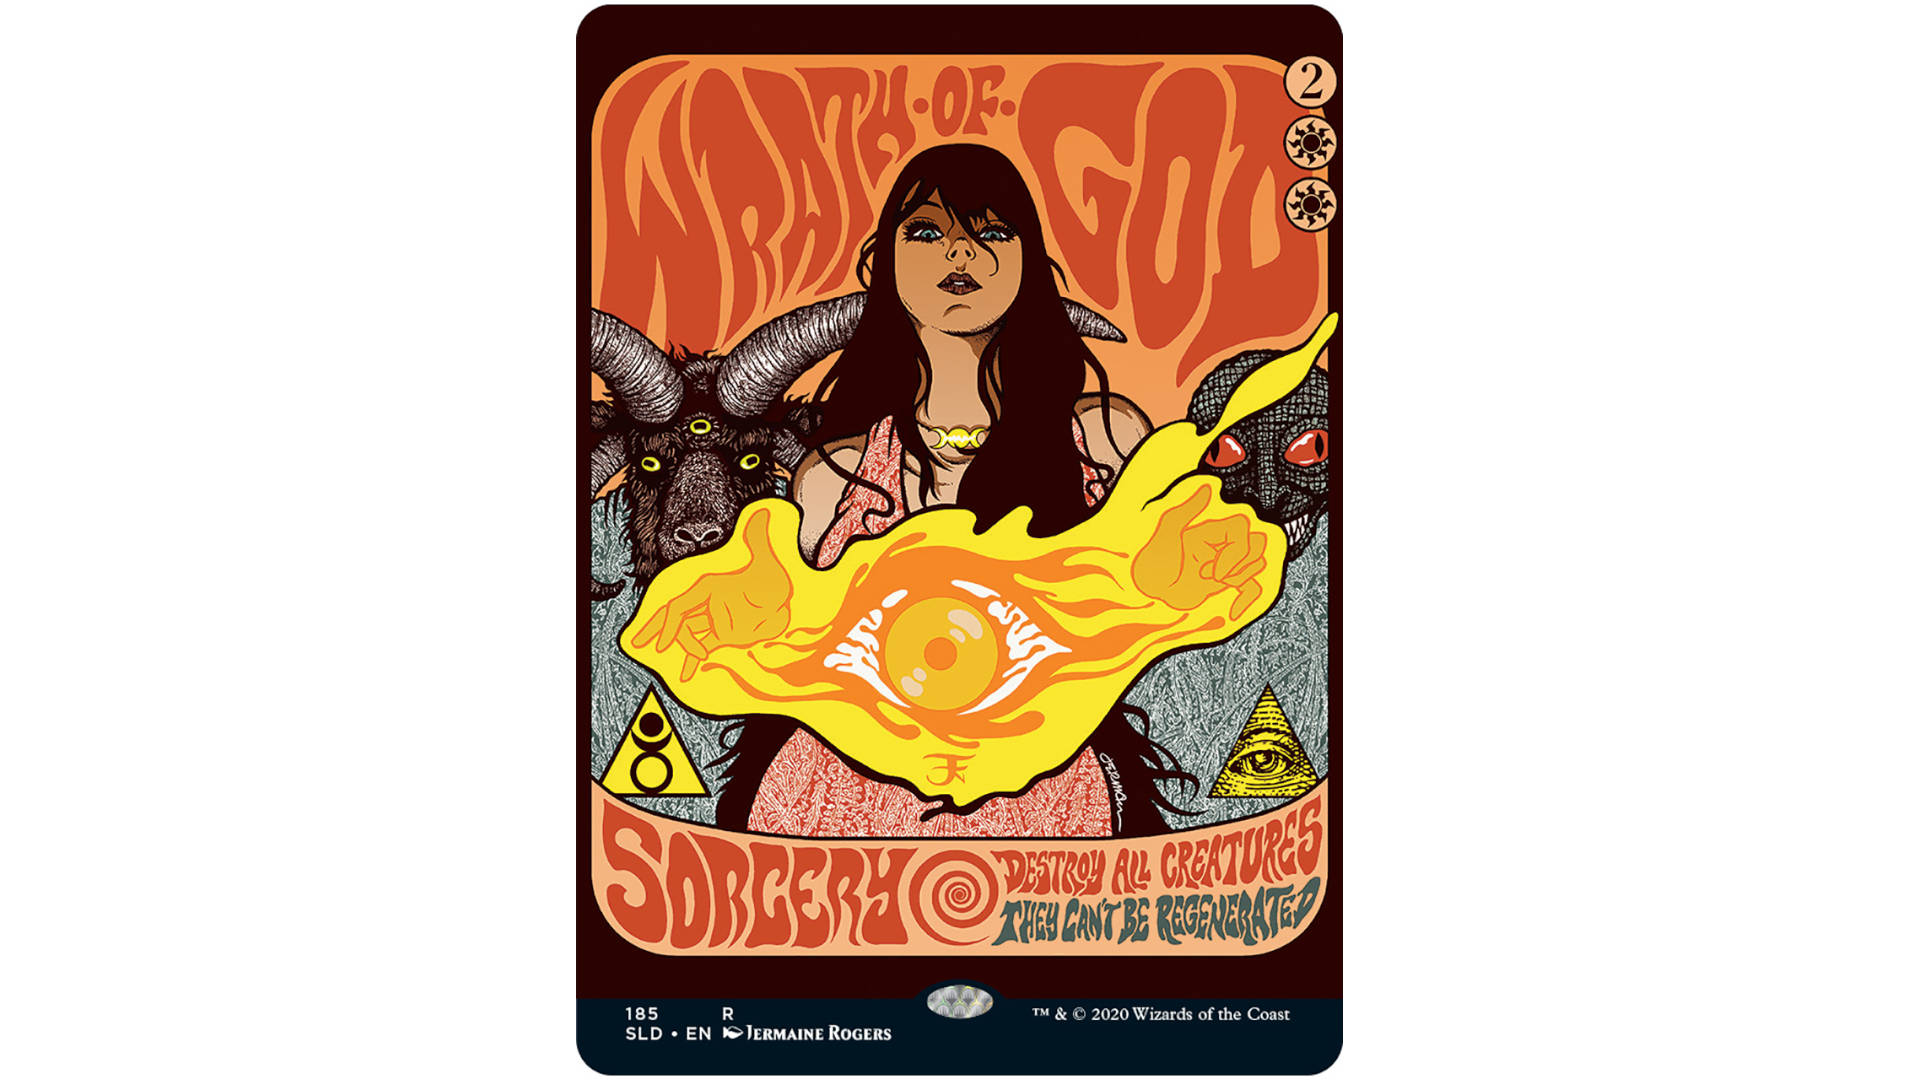 Magic: The Gathering Lair a Secret posters gets of drop psychedelic gig